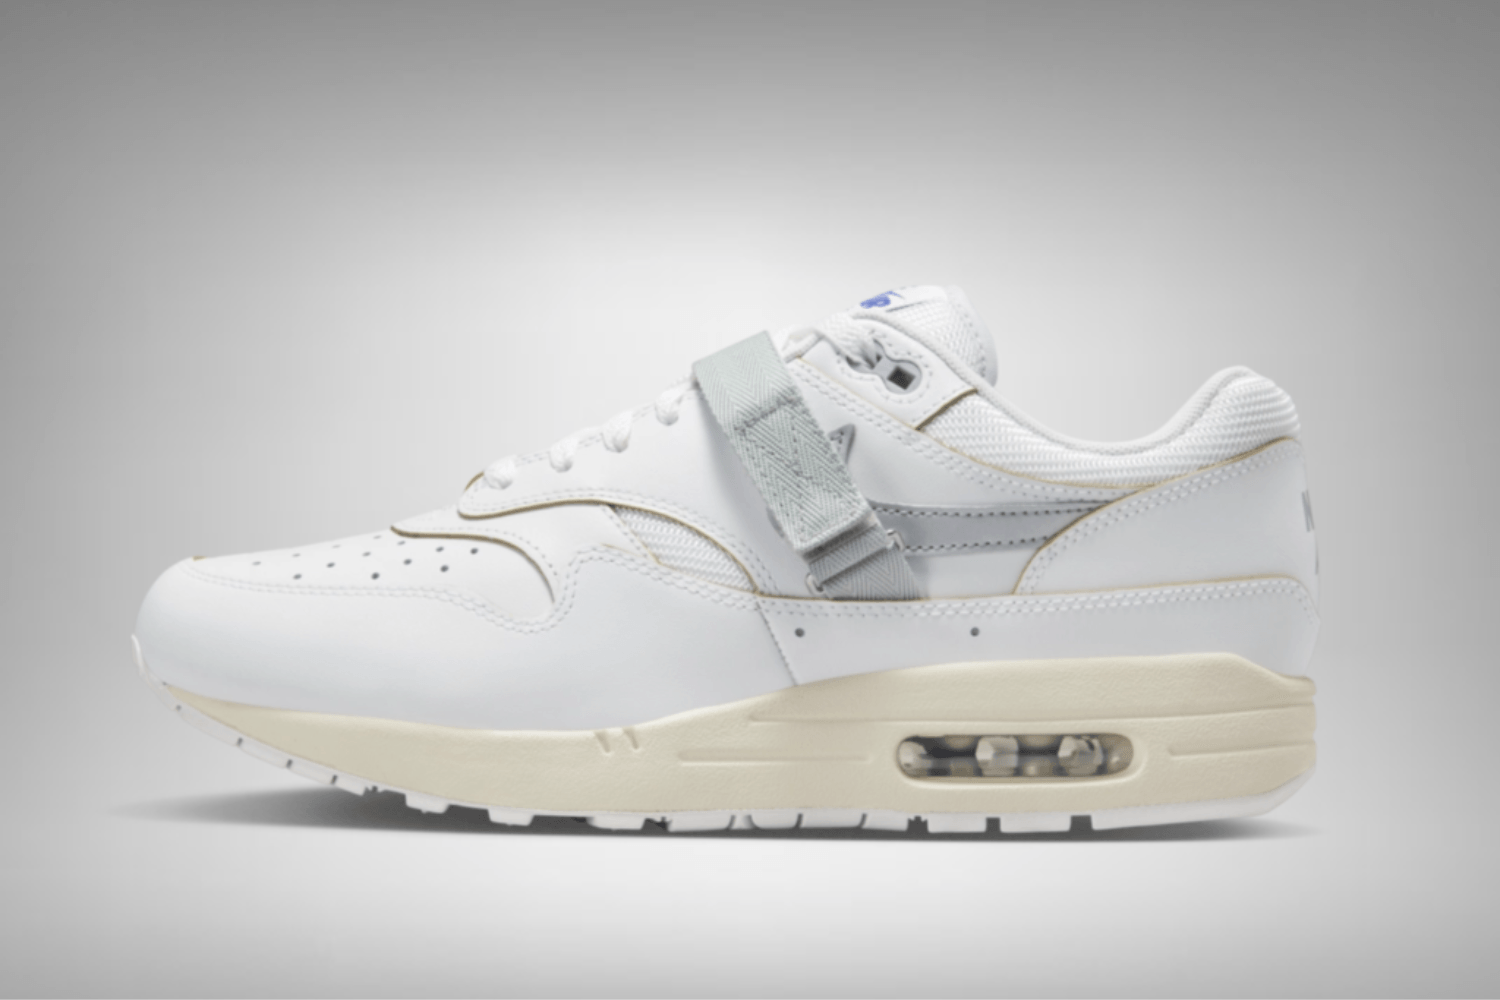 The Nike Air Max 1 'Timeless' takes inspiration from the first Air Force 1